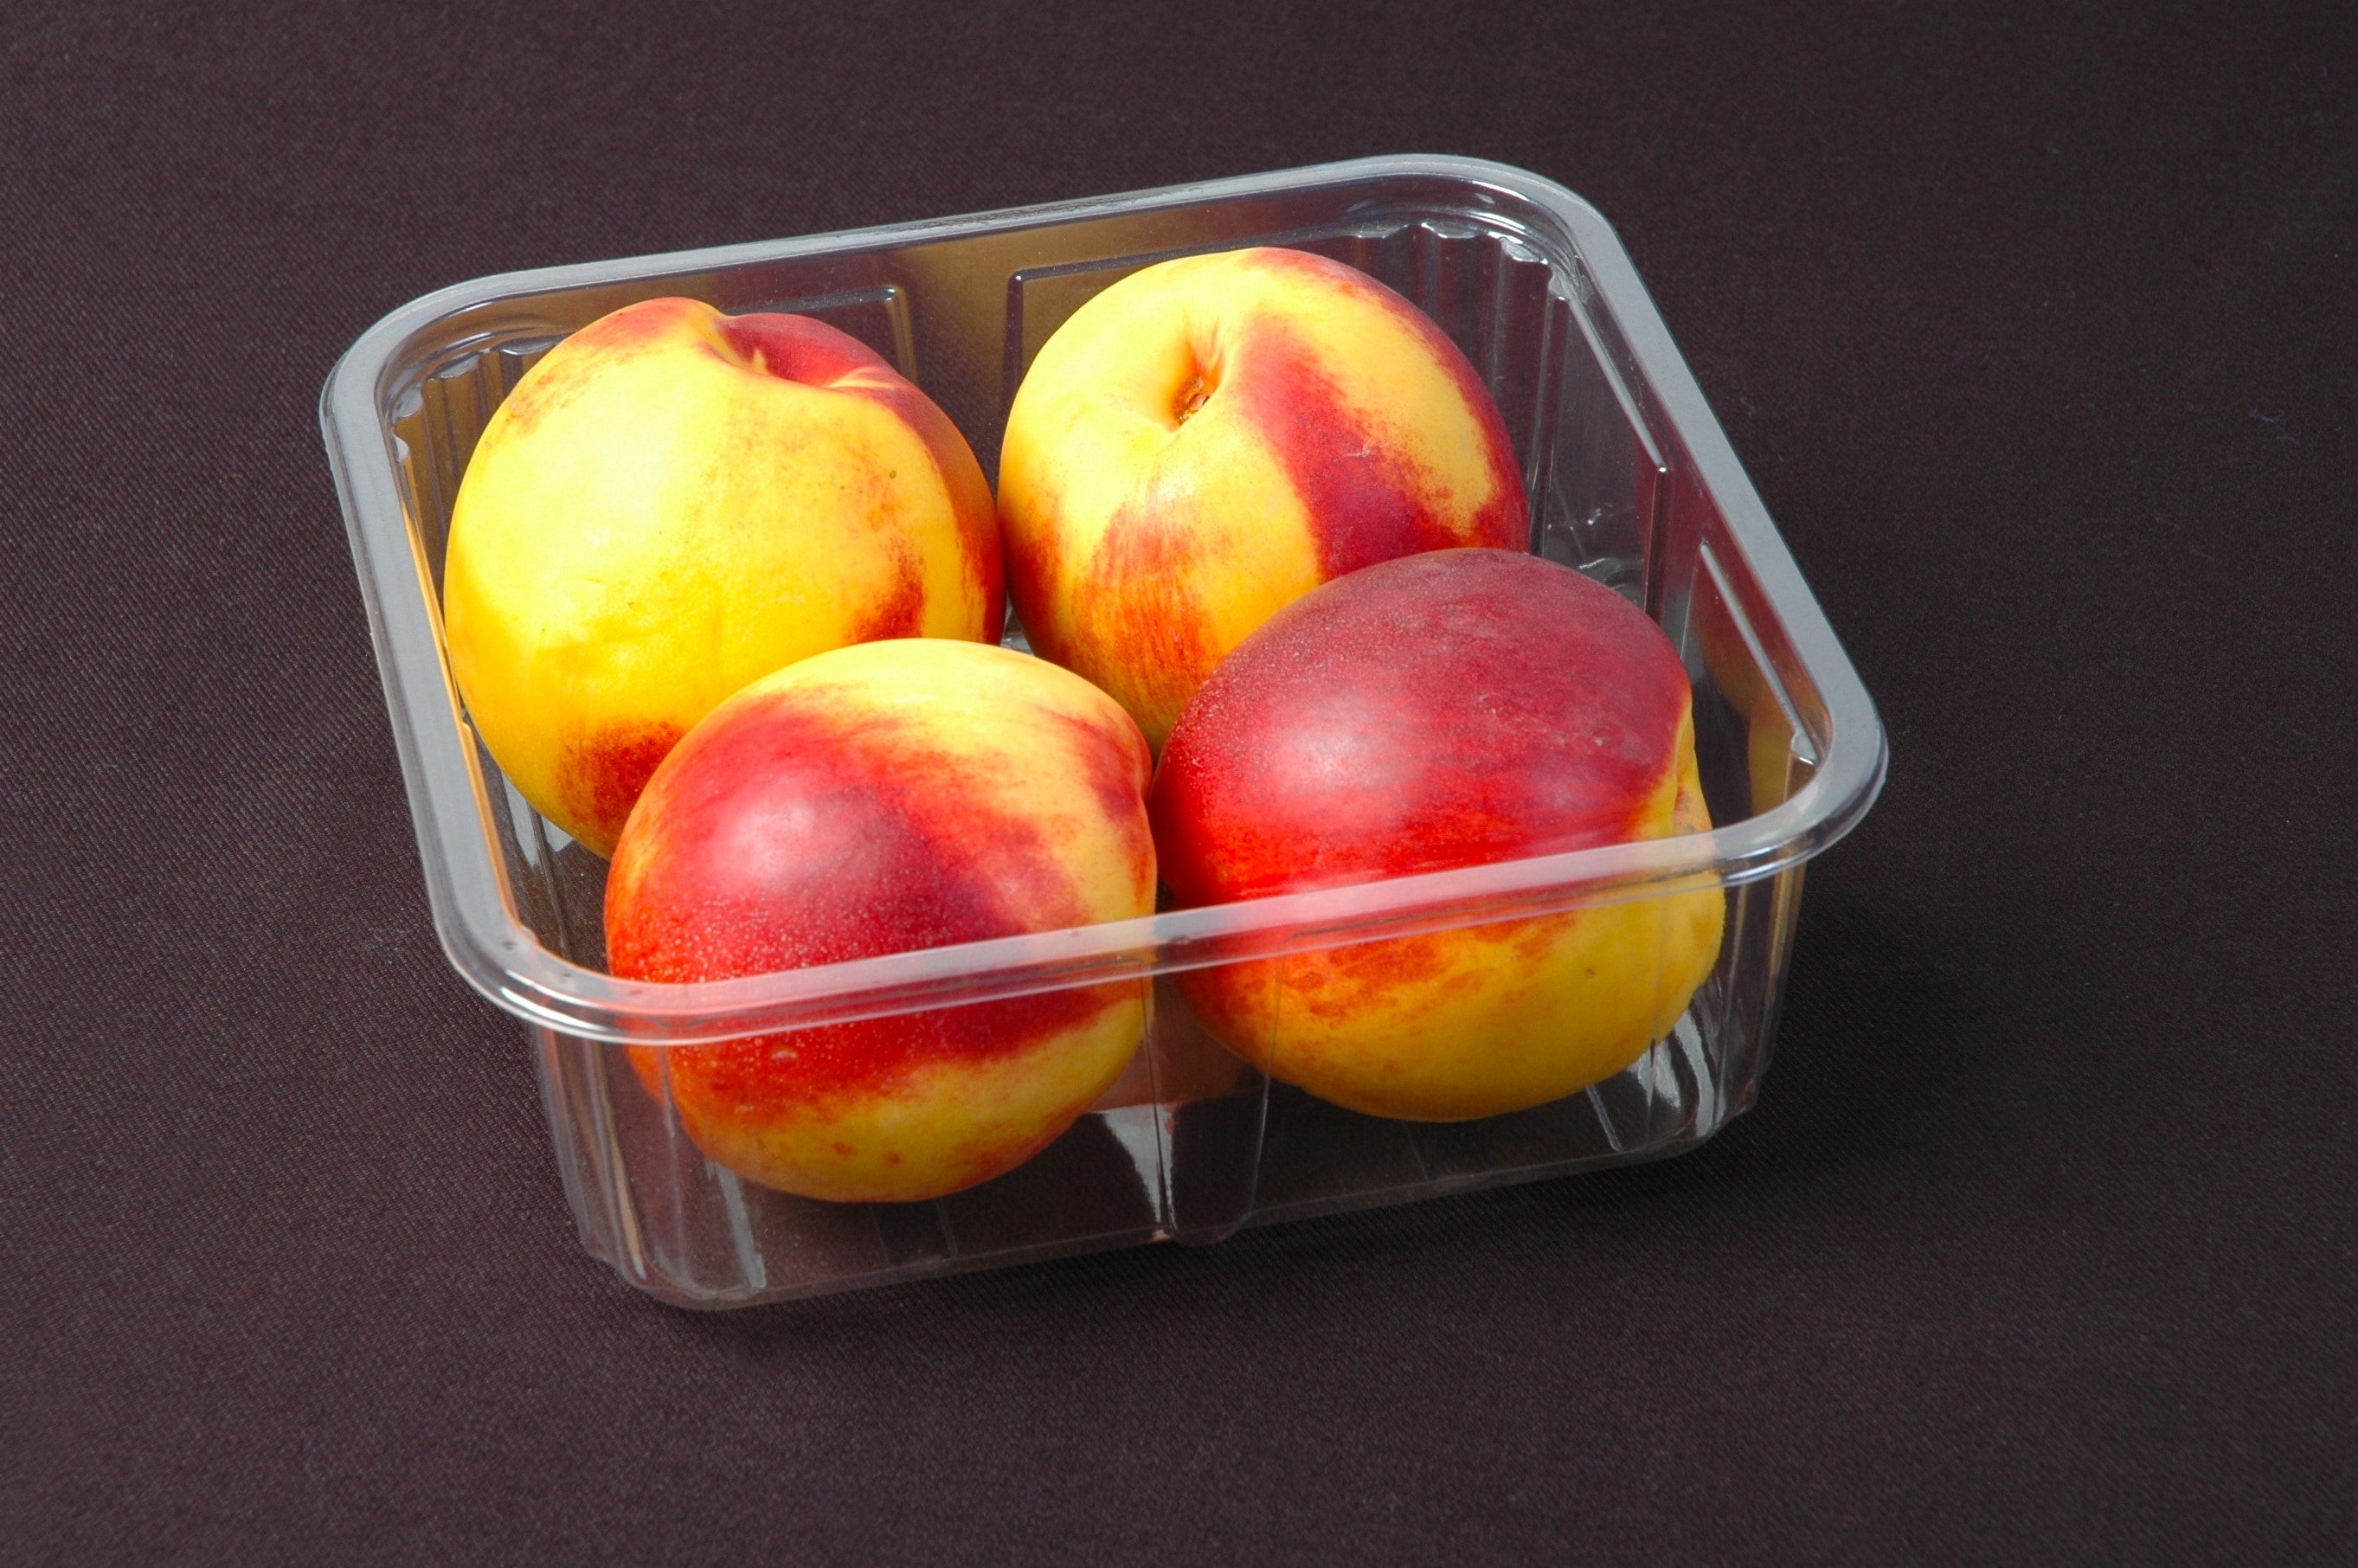 Download Four Red And Yellow Apples On Plastic Container Free Image Peakpx Yellowimages Mockups